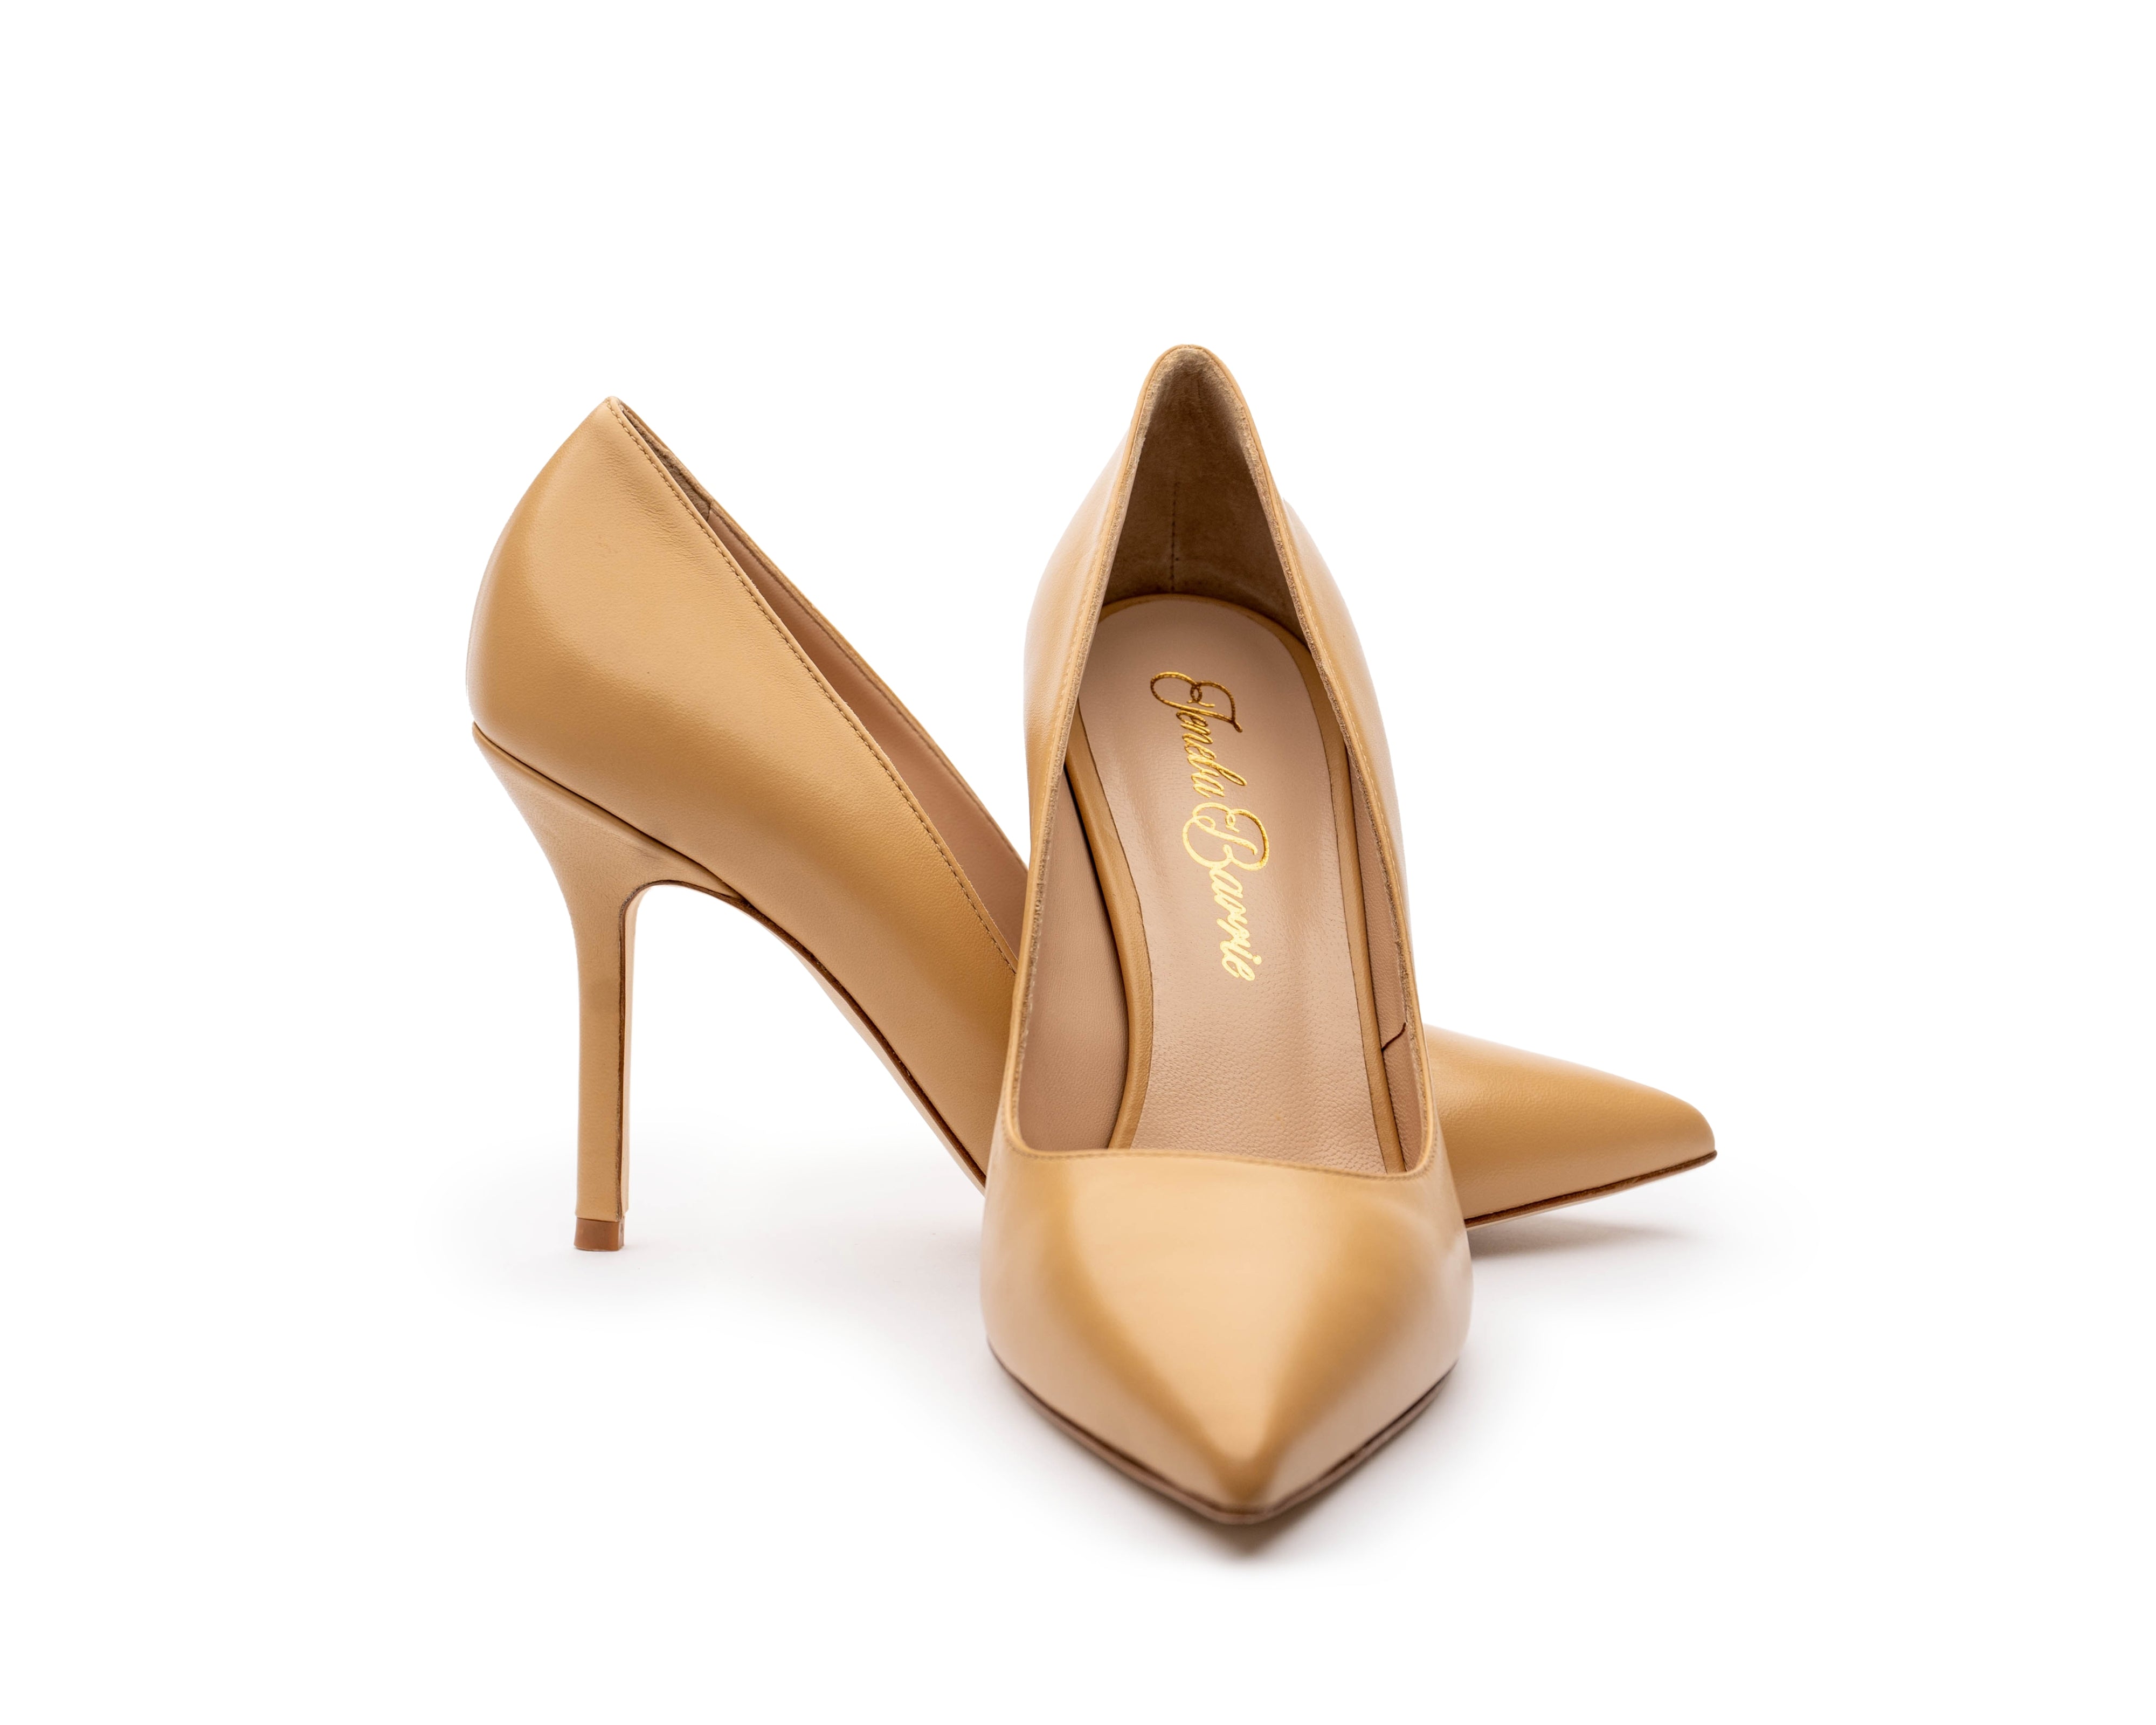 Tan Light Brown Pumps. Women's Light color High Heels. Nude Pumps. Nude Skin tone women's shoes. Business Shoes. Office Professional High Heels